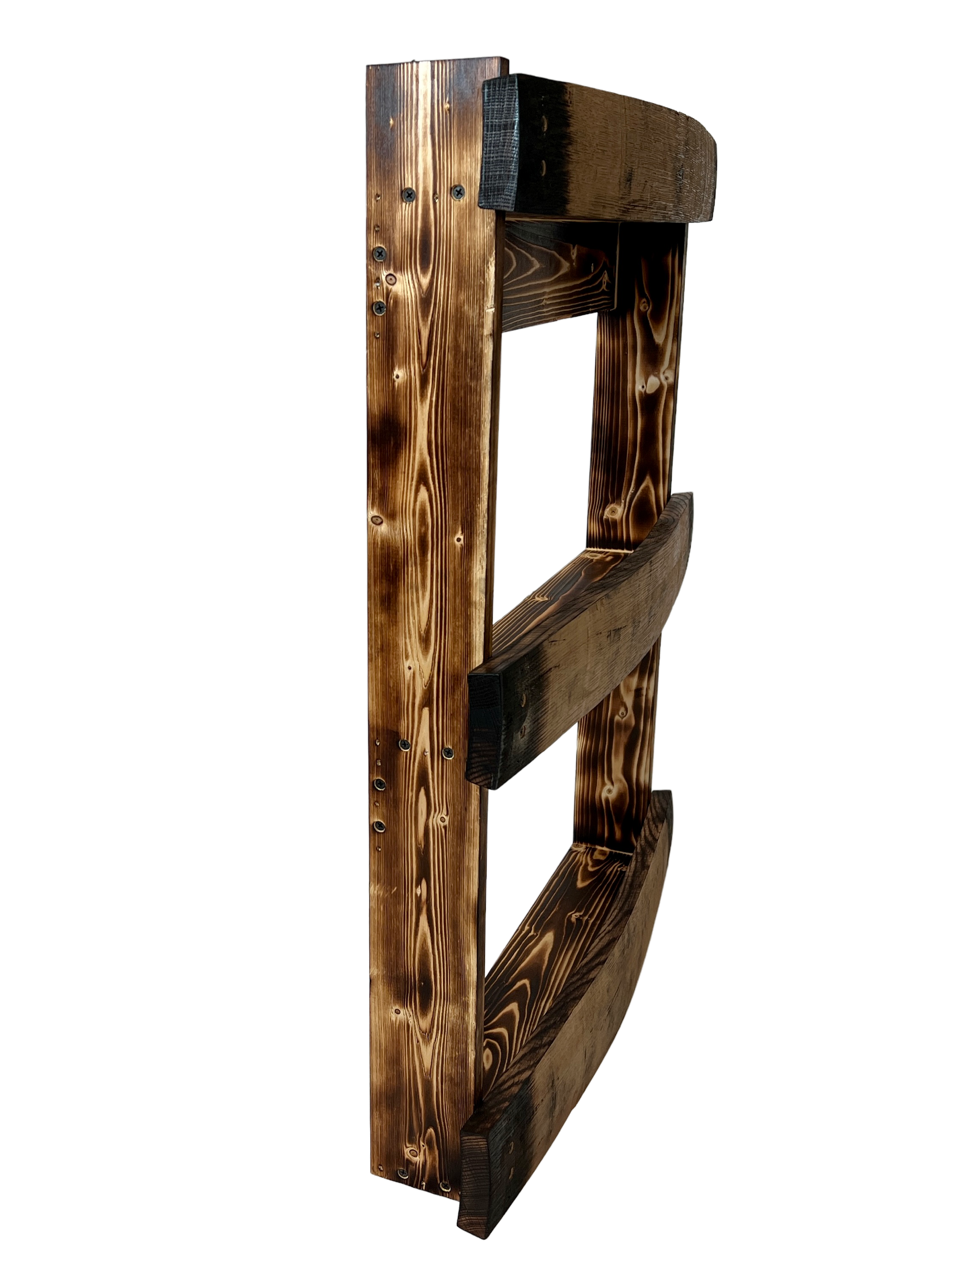 The Torched Barrel Bourbon/Whiskey Stave Shelf, Large Torched Three-Tier Liquor Bottle Display Cabinet, Wall Mount, Easy Installation